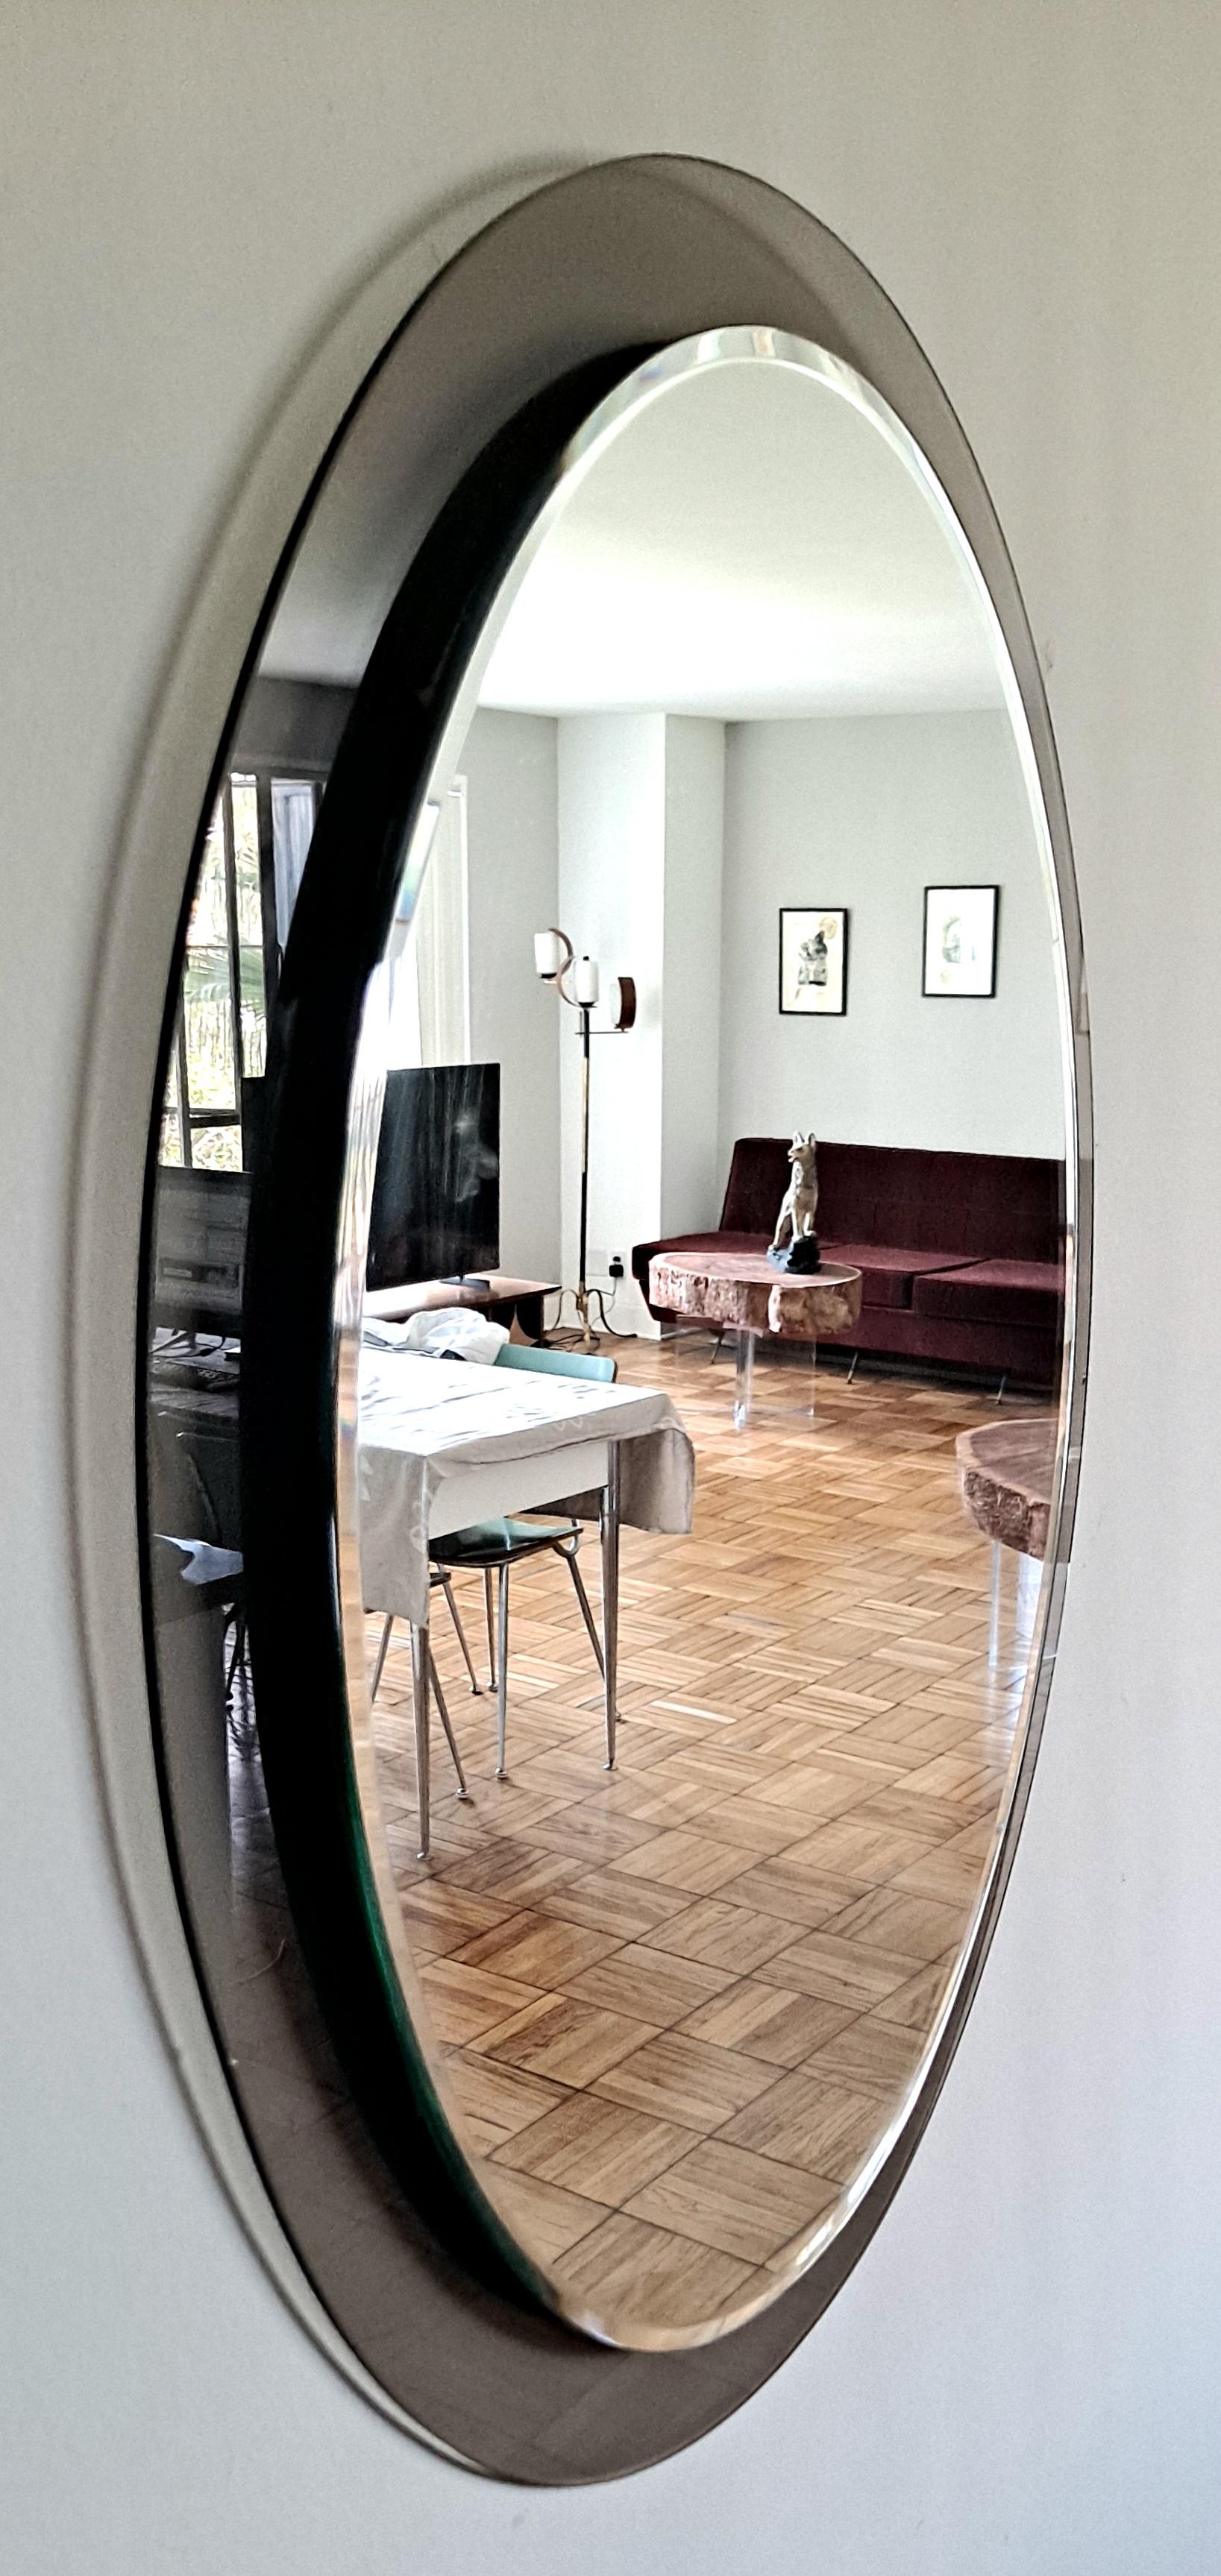 Mid-20th Century Midcentury Oval Wall Mirror whit Smoked Glass Frame by Cristal Arte For Sale